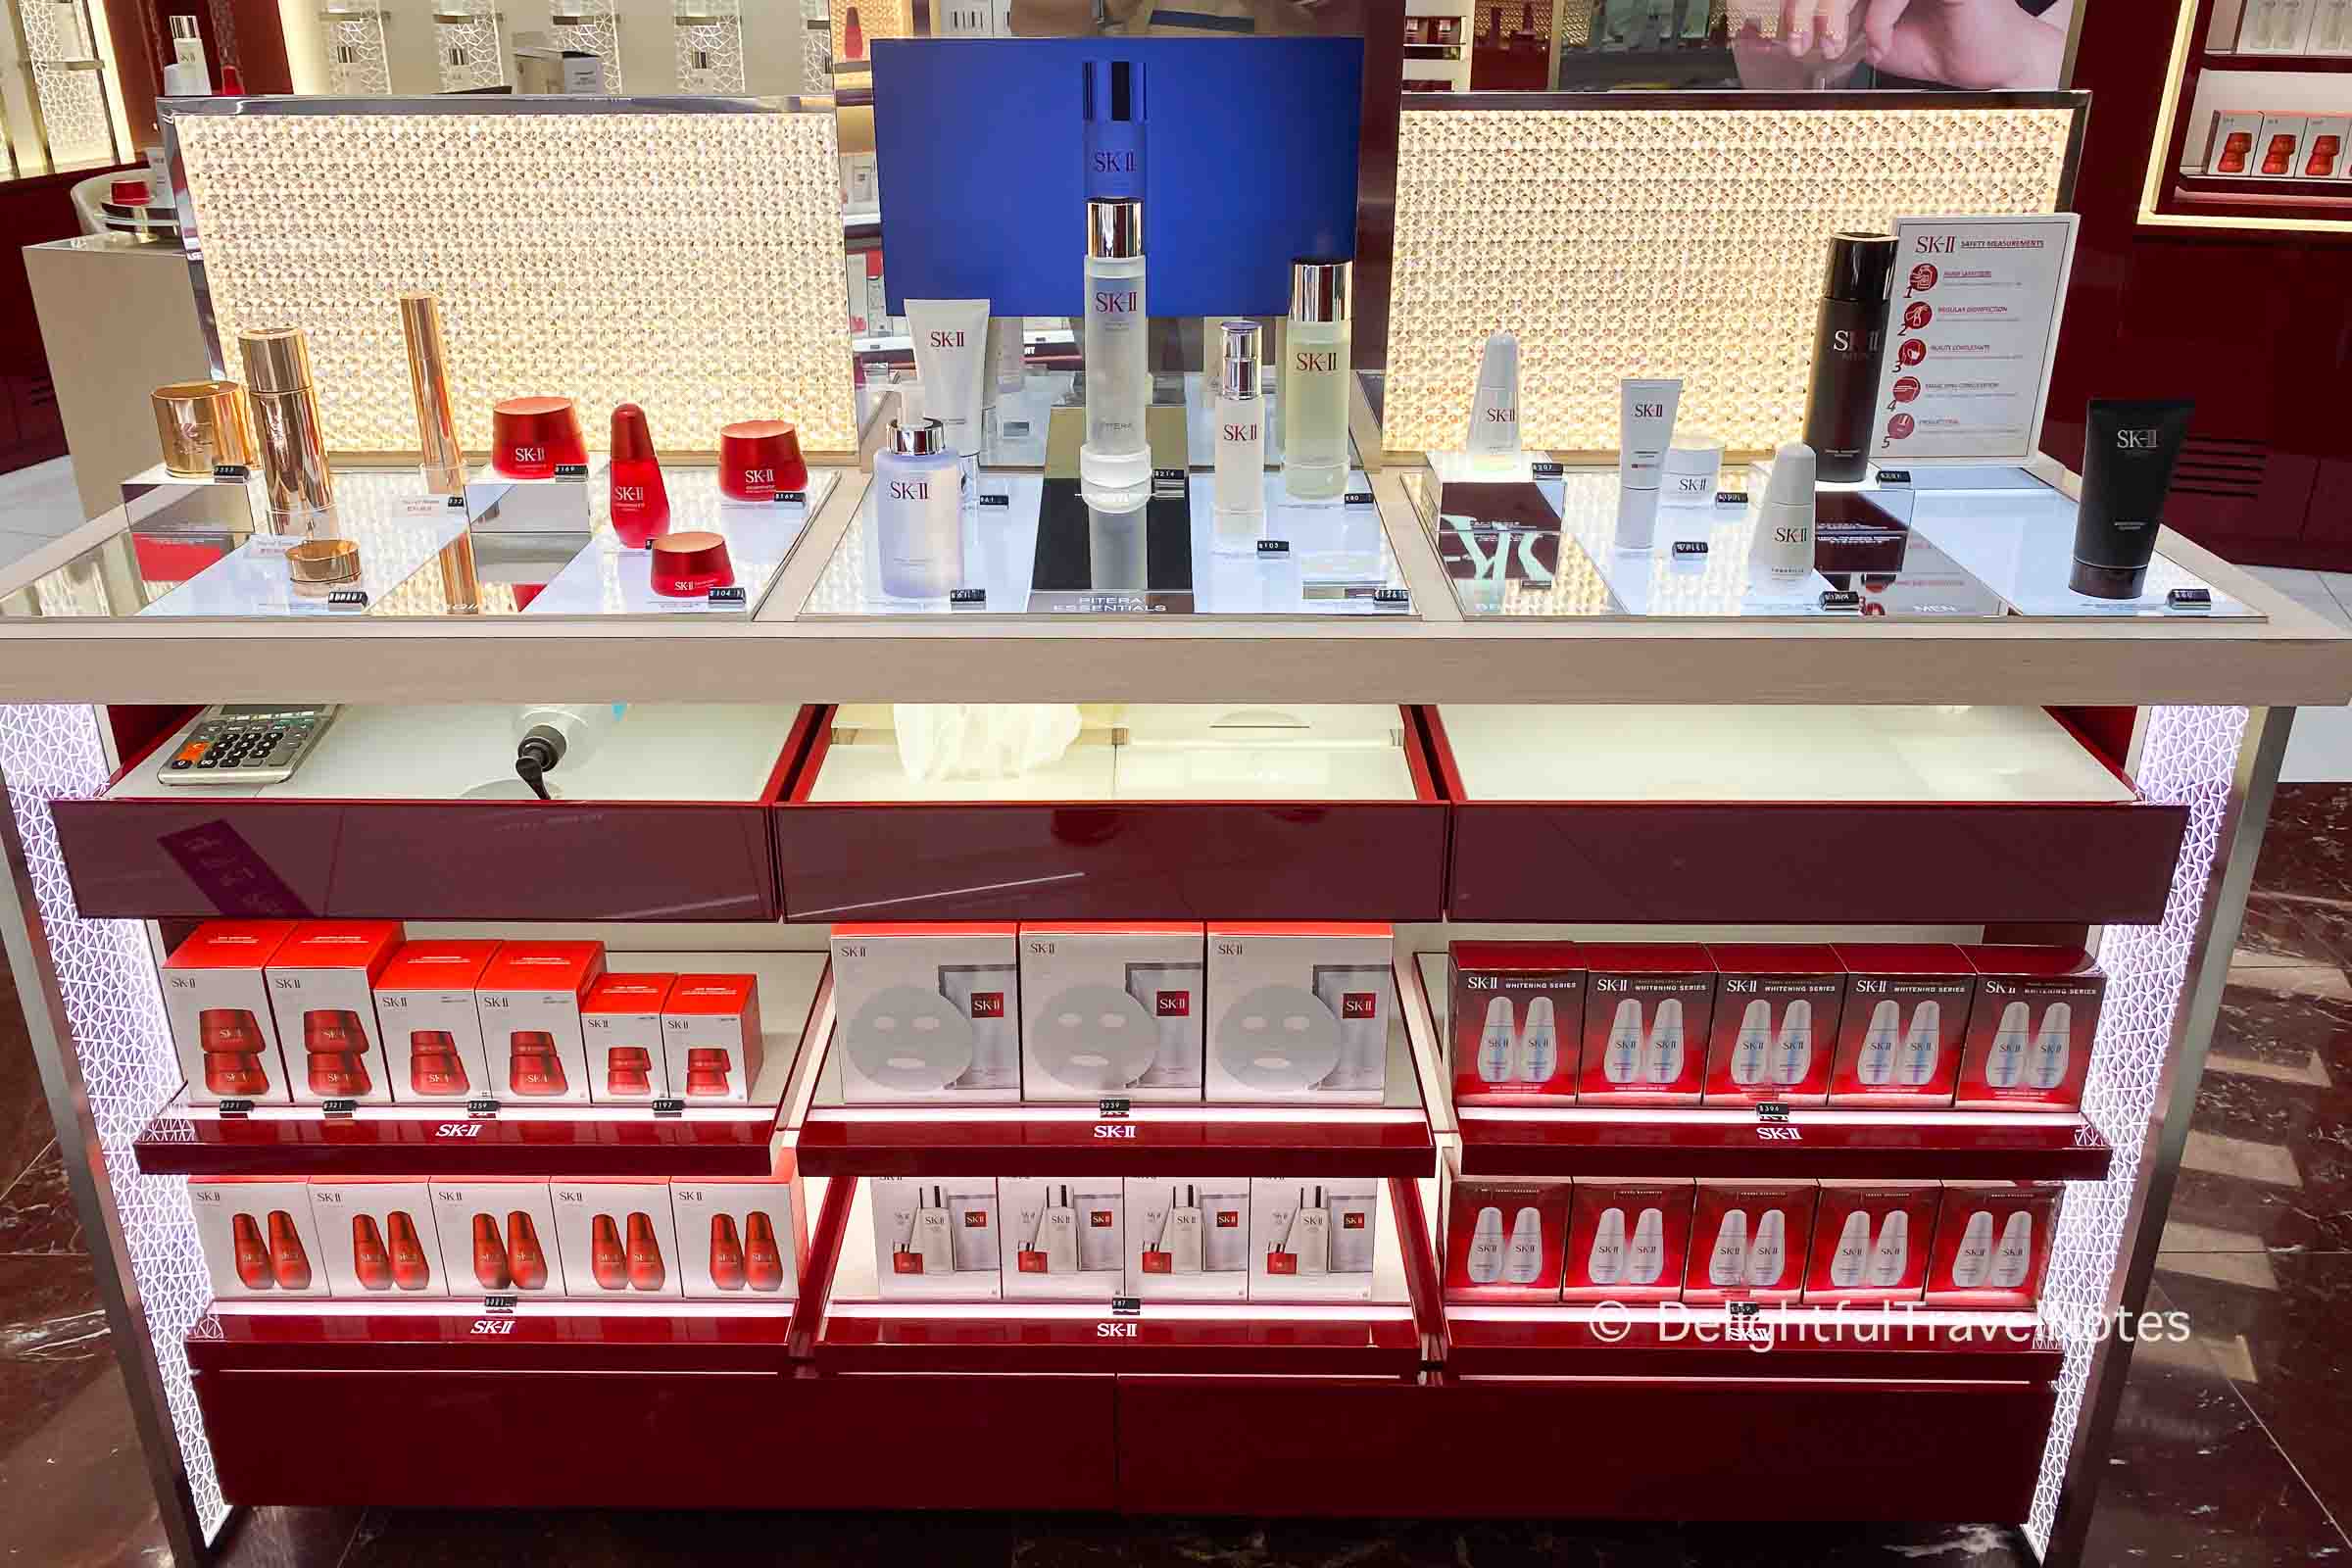 SK-II skincare products on display.